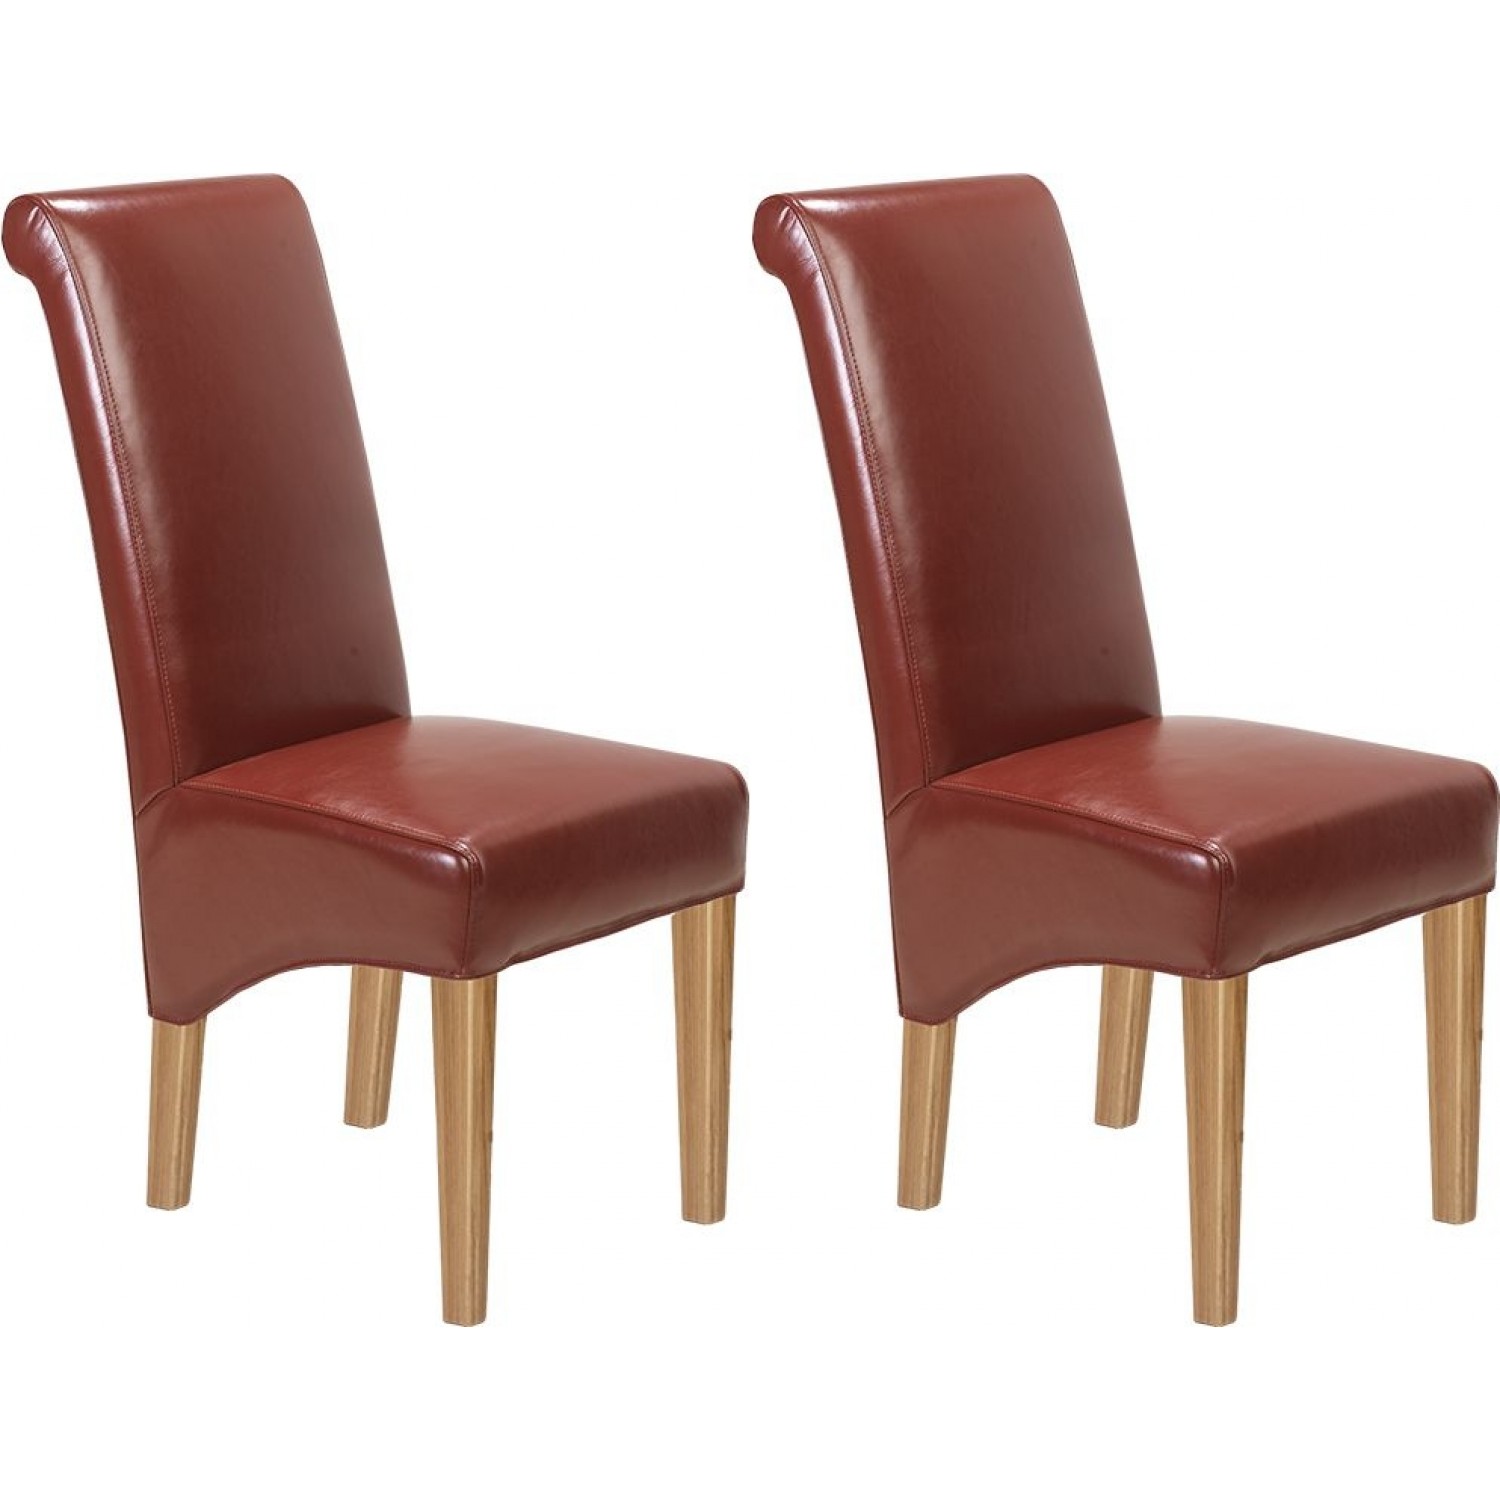 Oak Furniture House, Red Leather Kitchen Table Chairs